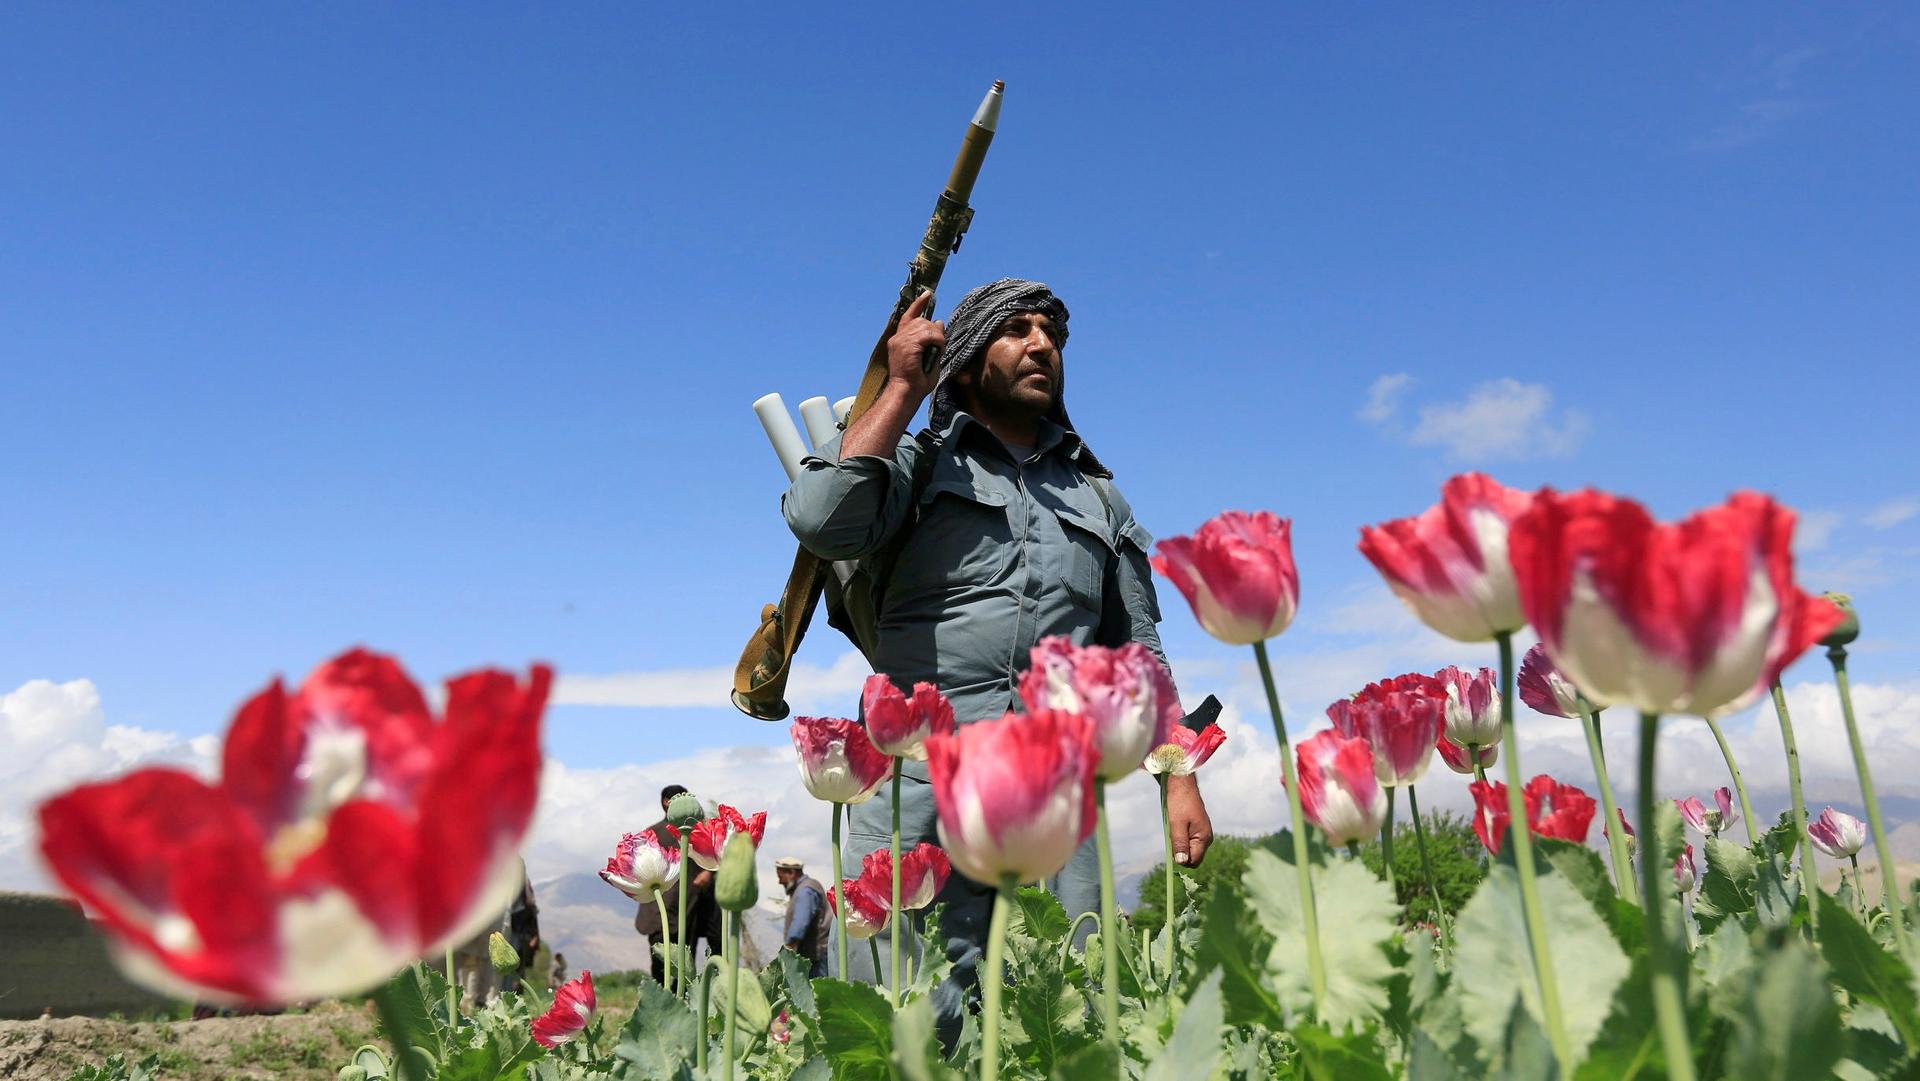 An Afghan policeman destroys poppies during a campaign against narcotics in Jalalabad province, Afghanistan, April 4, 2017.